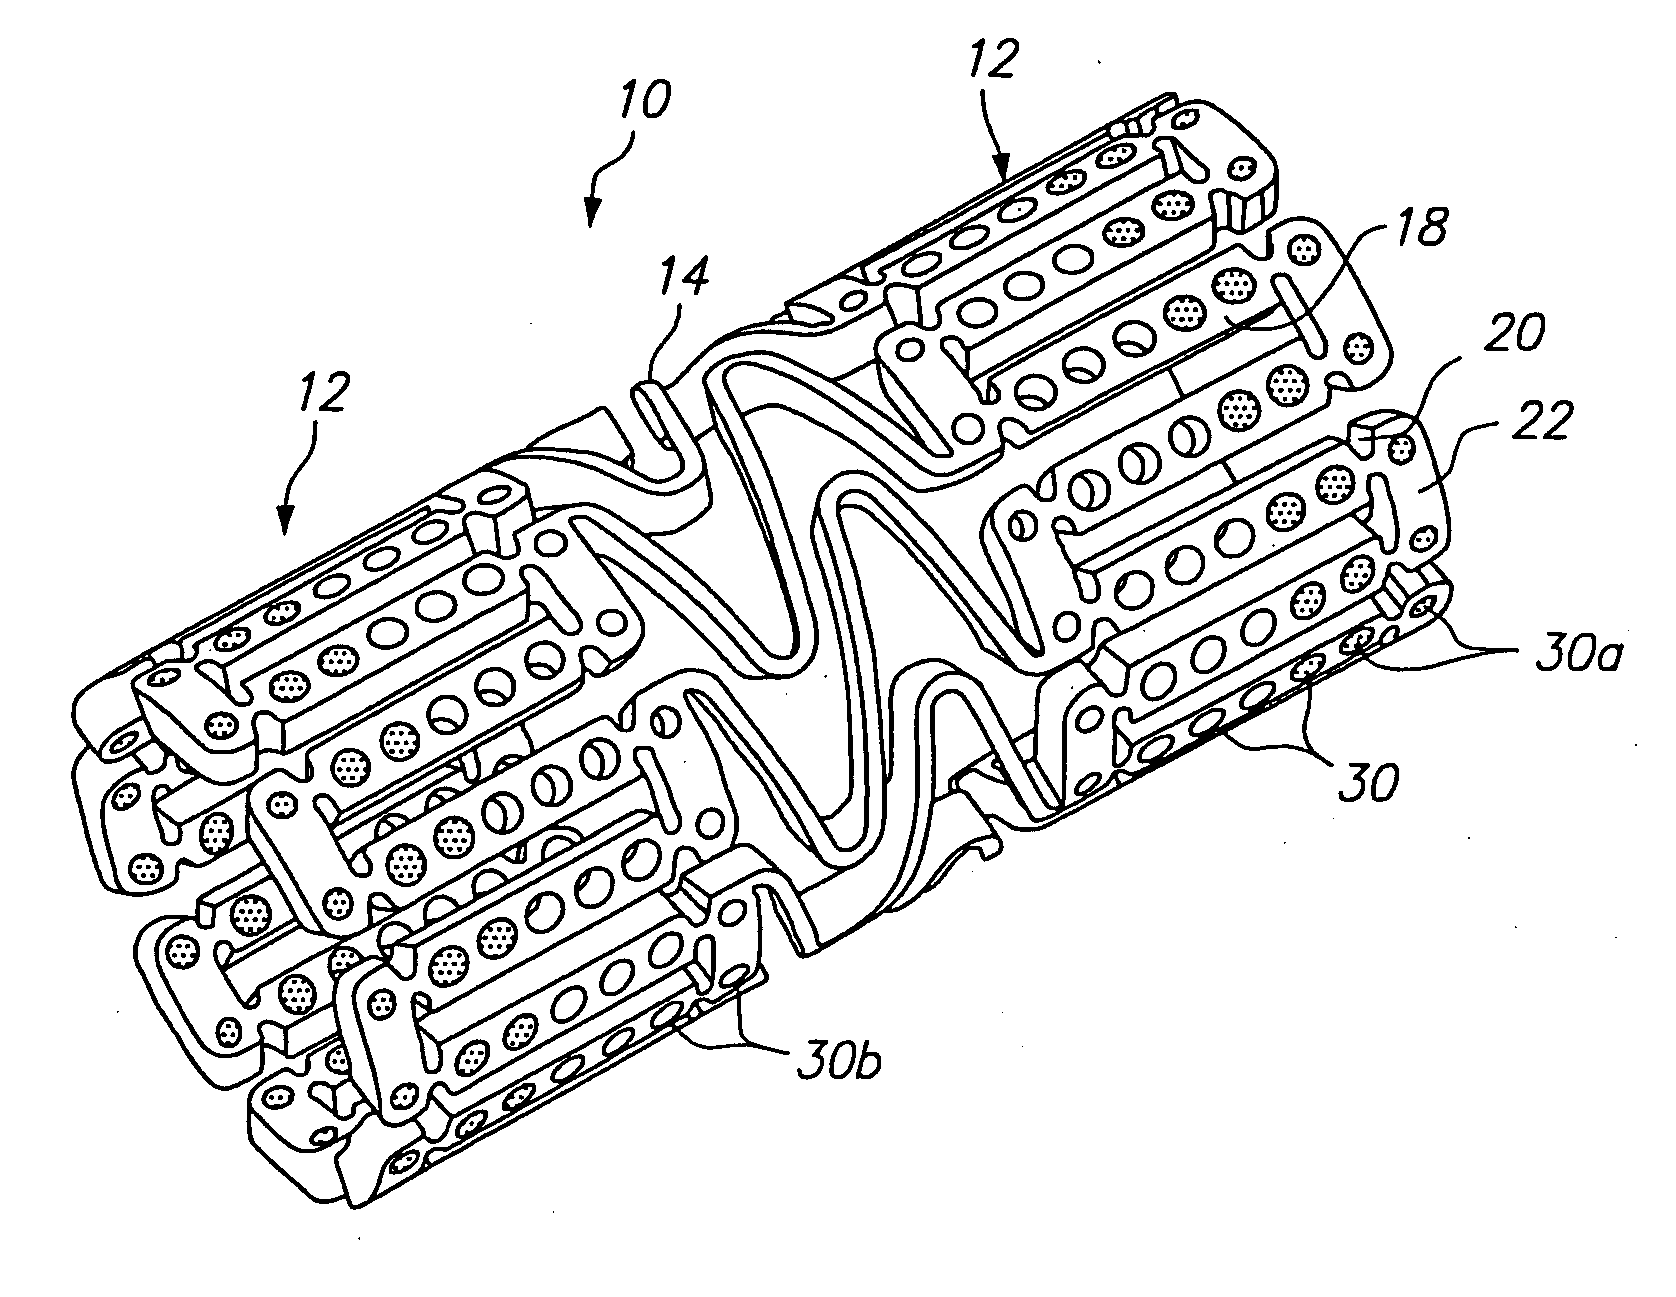 Expandable medical device with openings for delivery of multiple beneficial agents